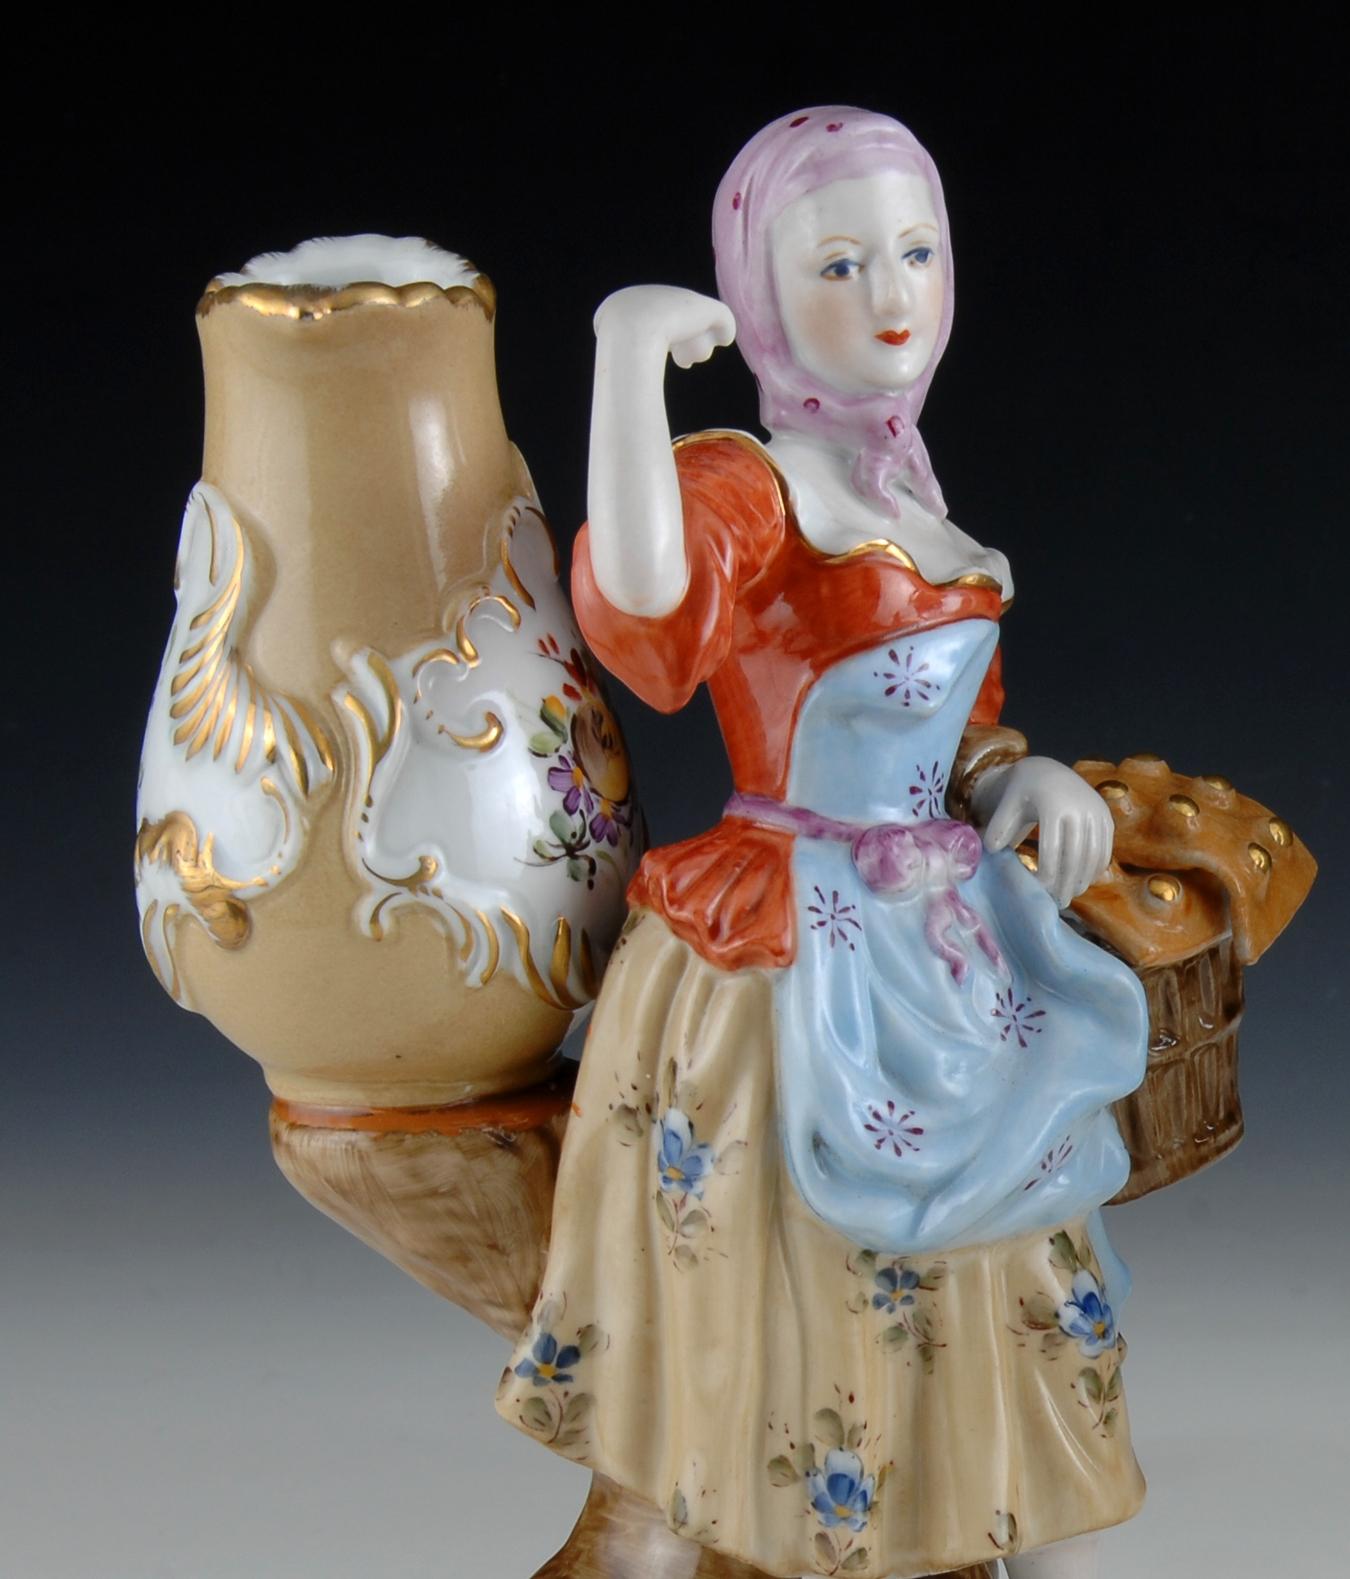 Couple of figures holding two vases, of the type used to contain a flower. Both the young man and the lady stand on round bases decorated with curved elements inspired by the Rococo. The influence of works of important European porcelain factories